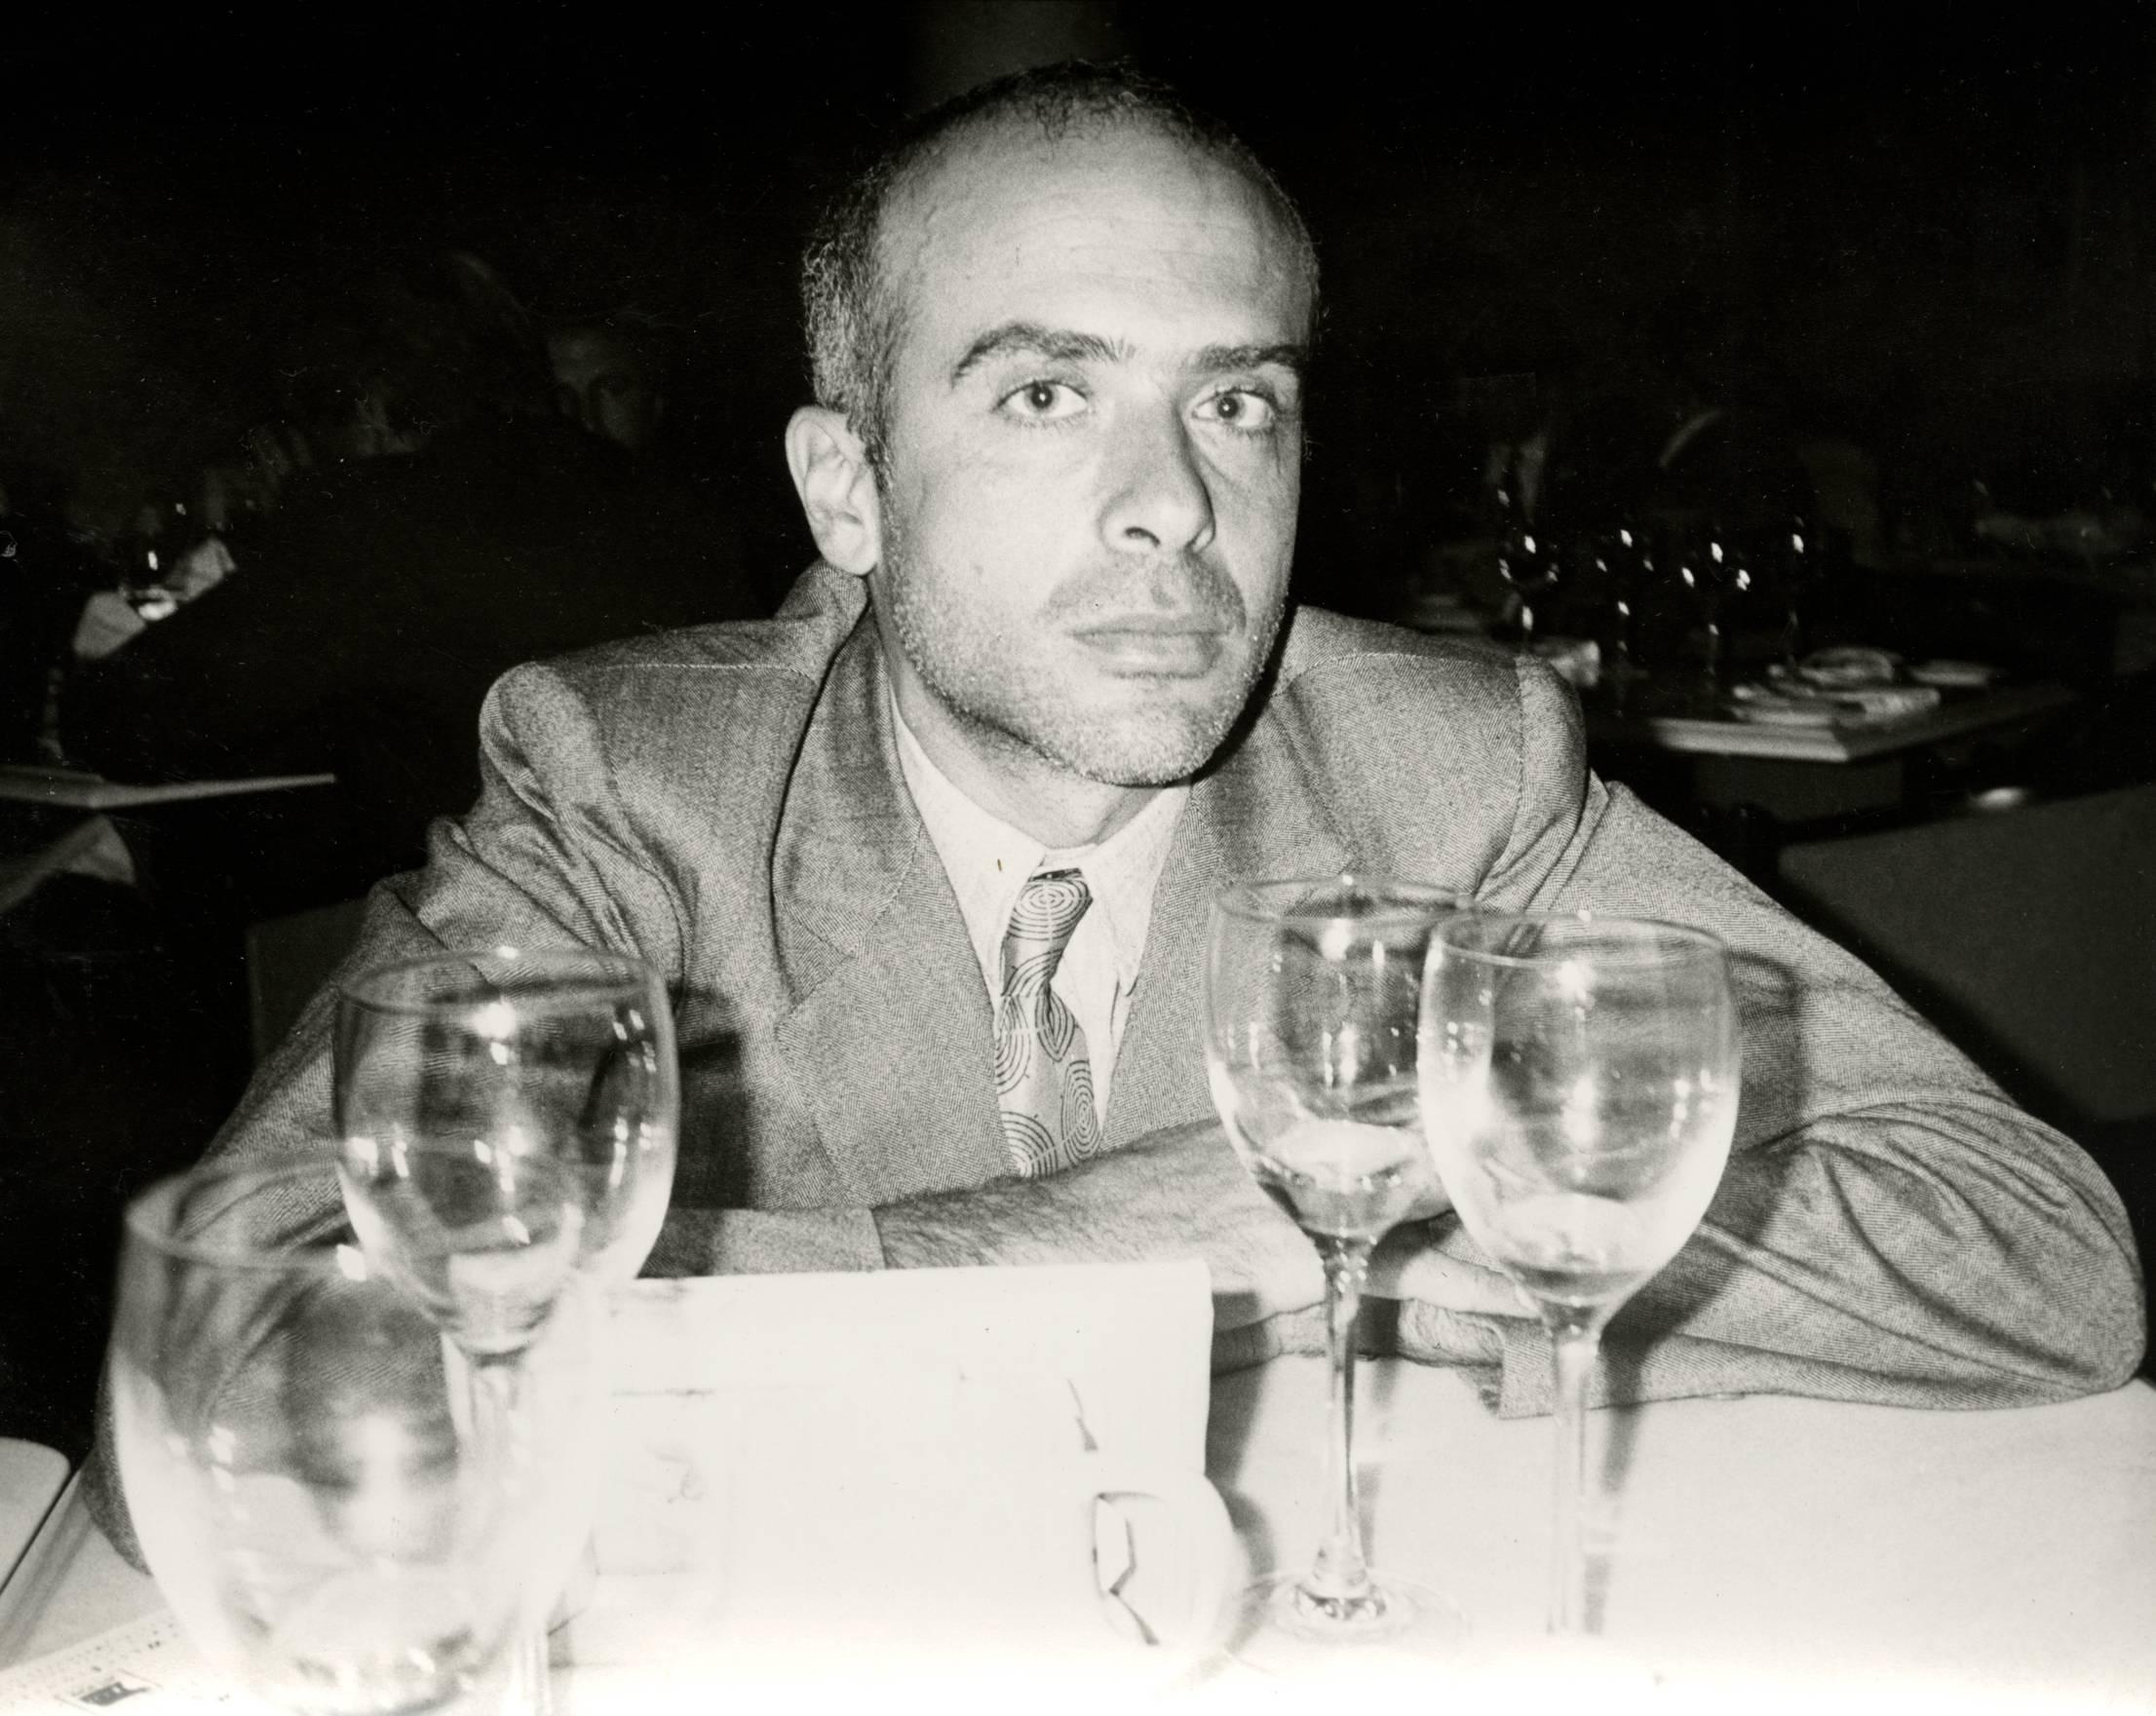 Andy Warhol Black and White Photograph - Francesco Clemente at Cafe Roma